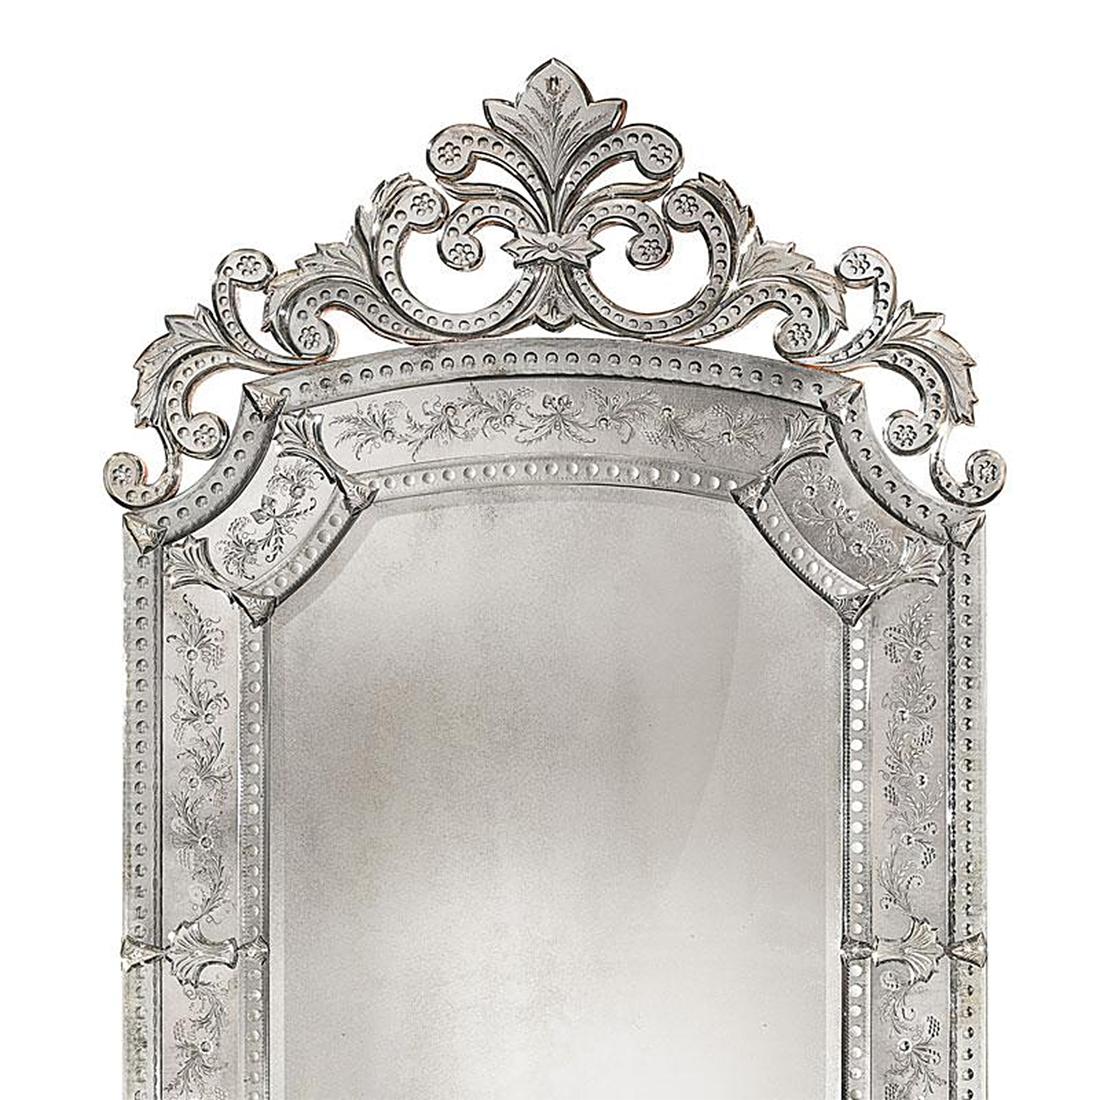 Mirror Mezzo with structure in solid wood
and with handmade and engraved and
beveled antique mirrored glass. In the
style of Louis XIV. Exceptional piece.